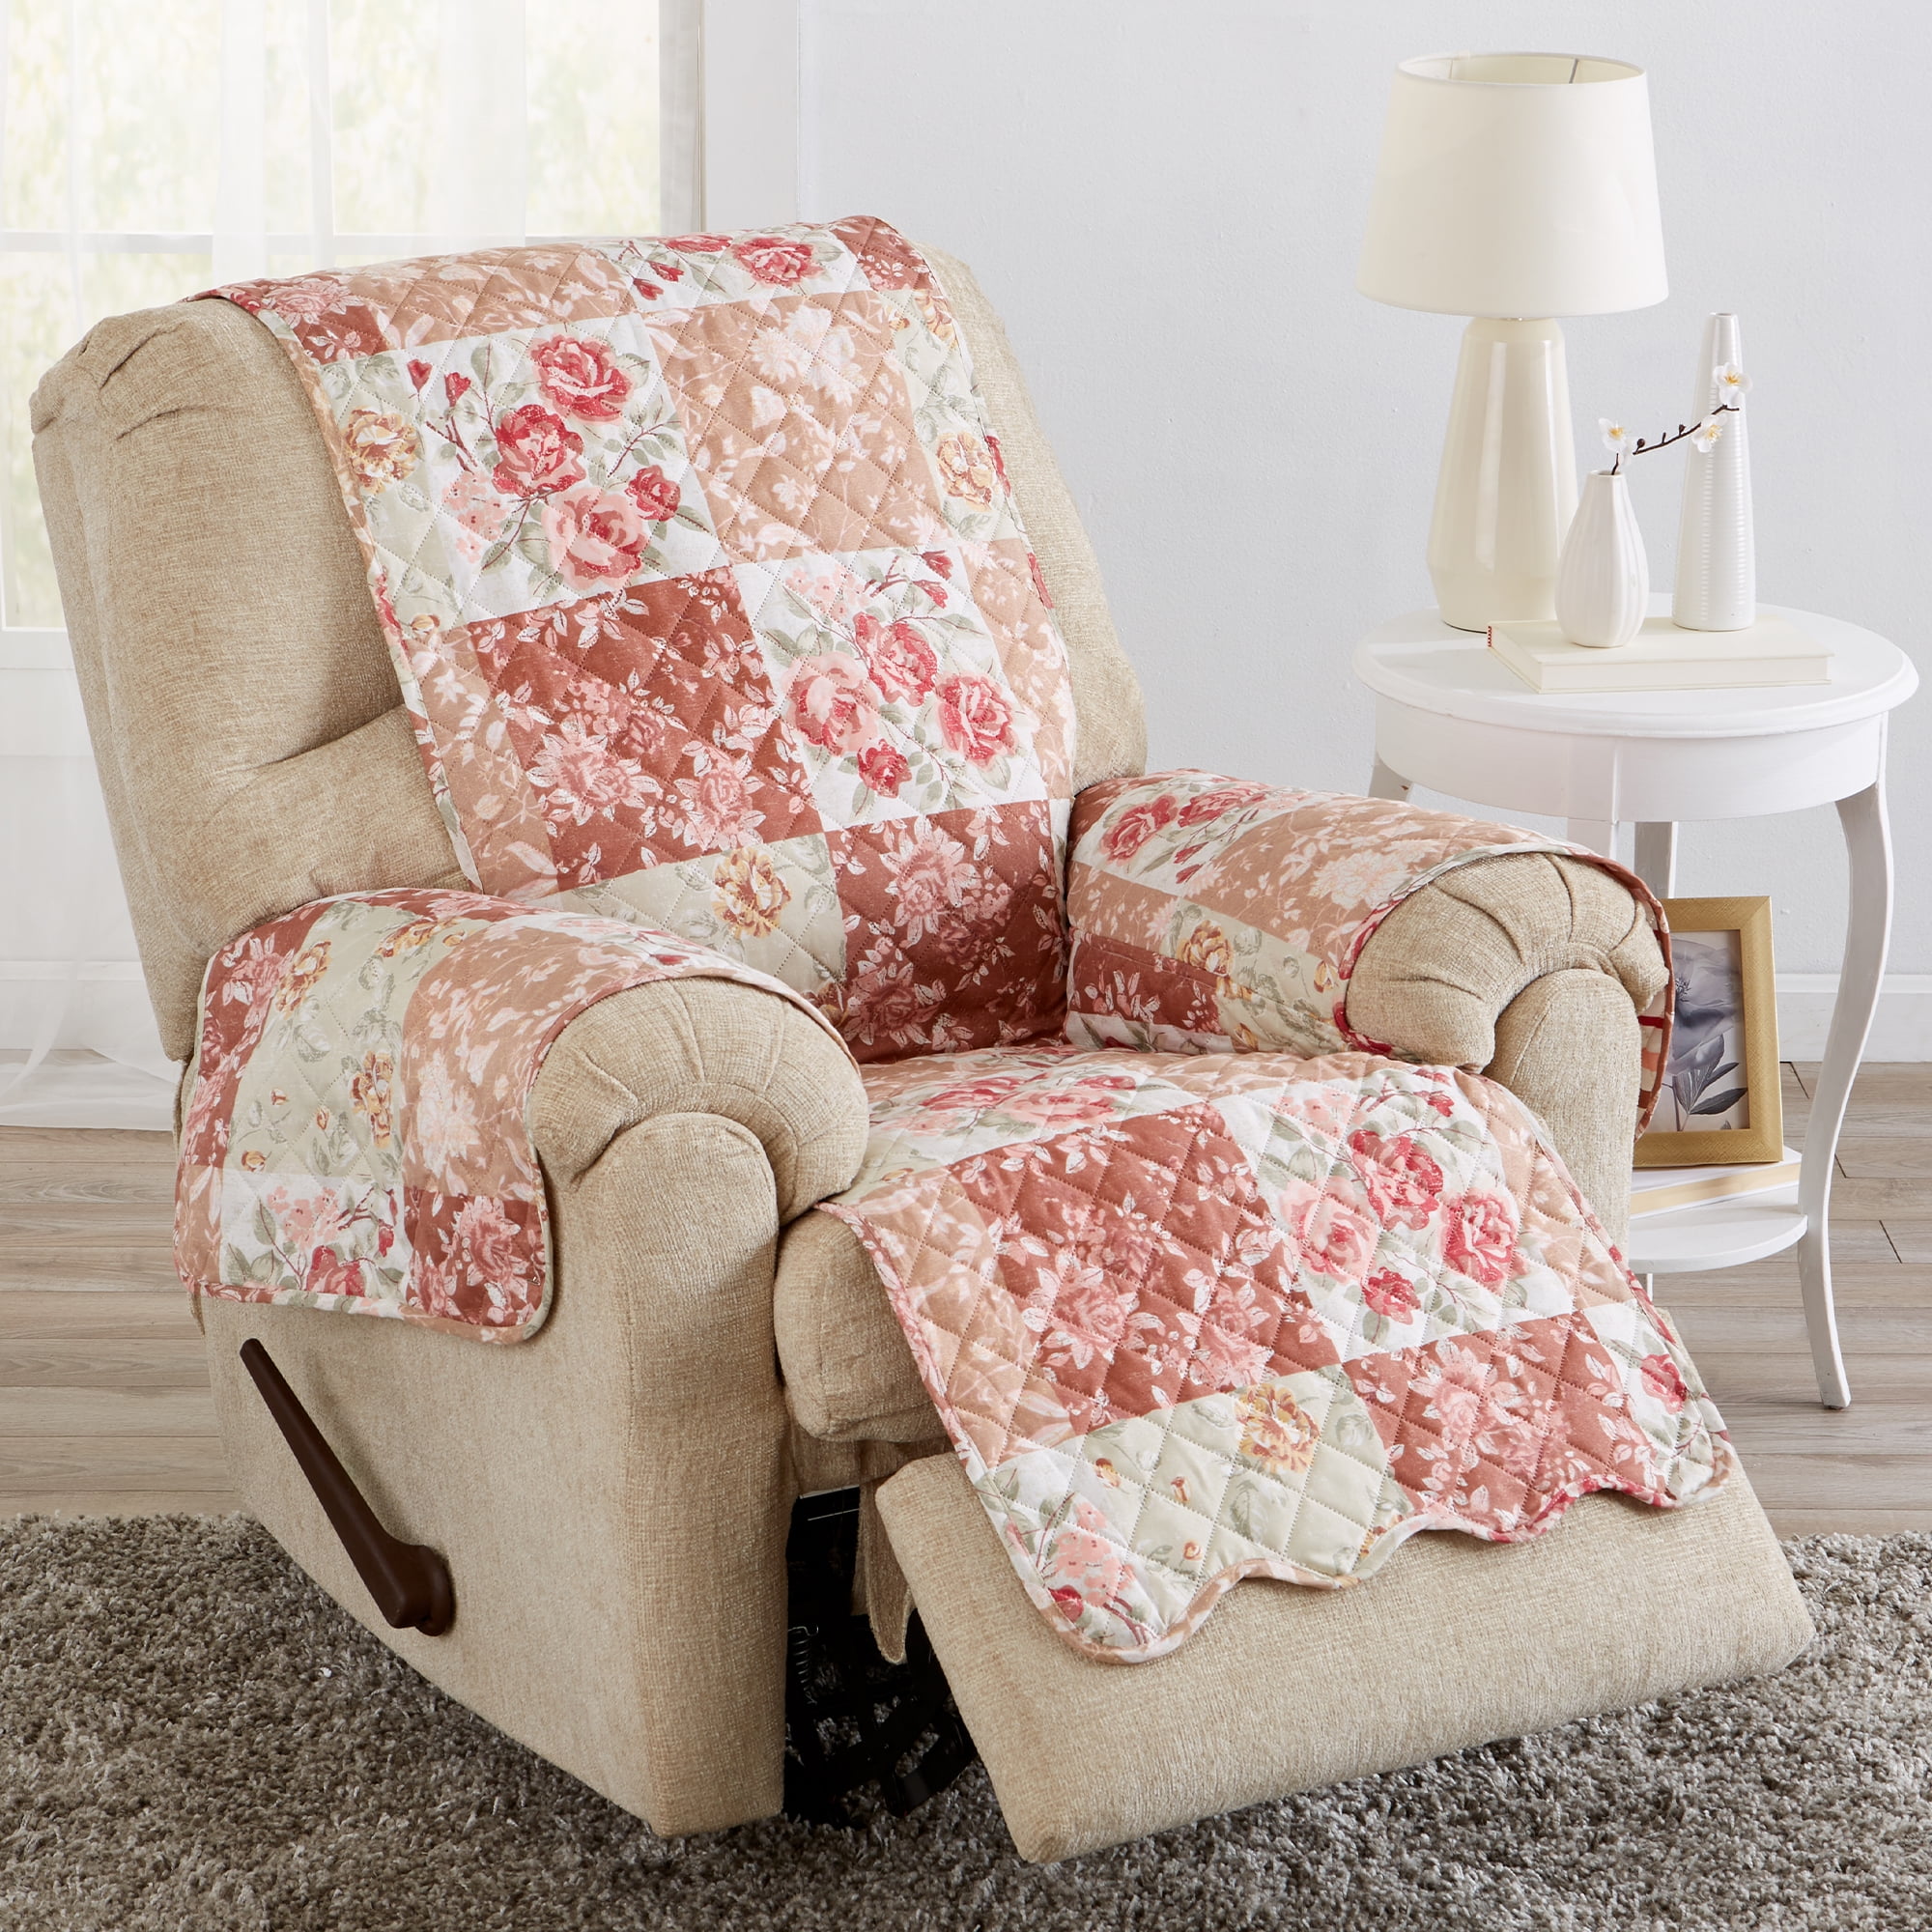 Reversible Quilted Chair Cover with Plaid Patchwork Pattern 